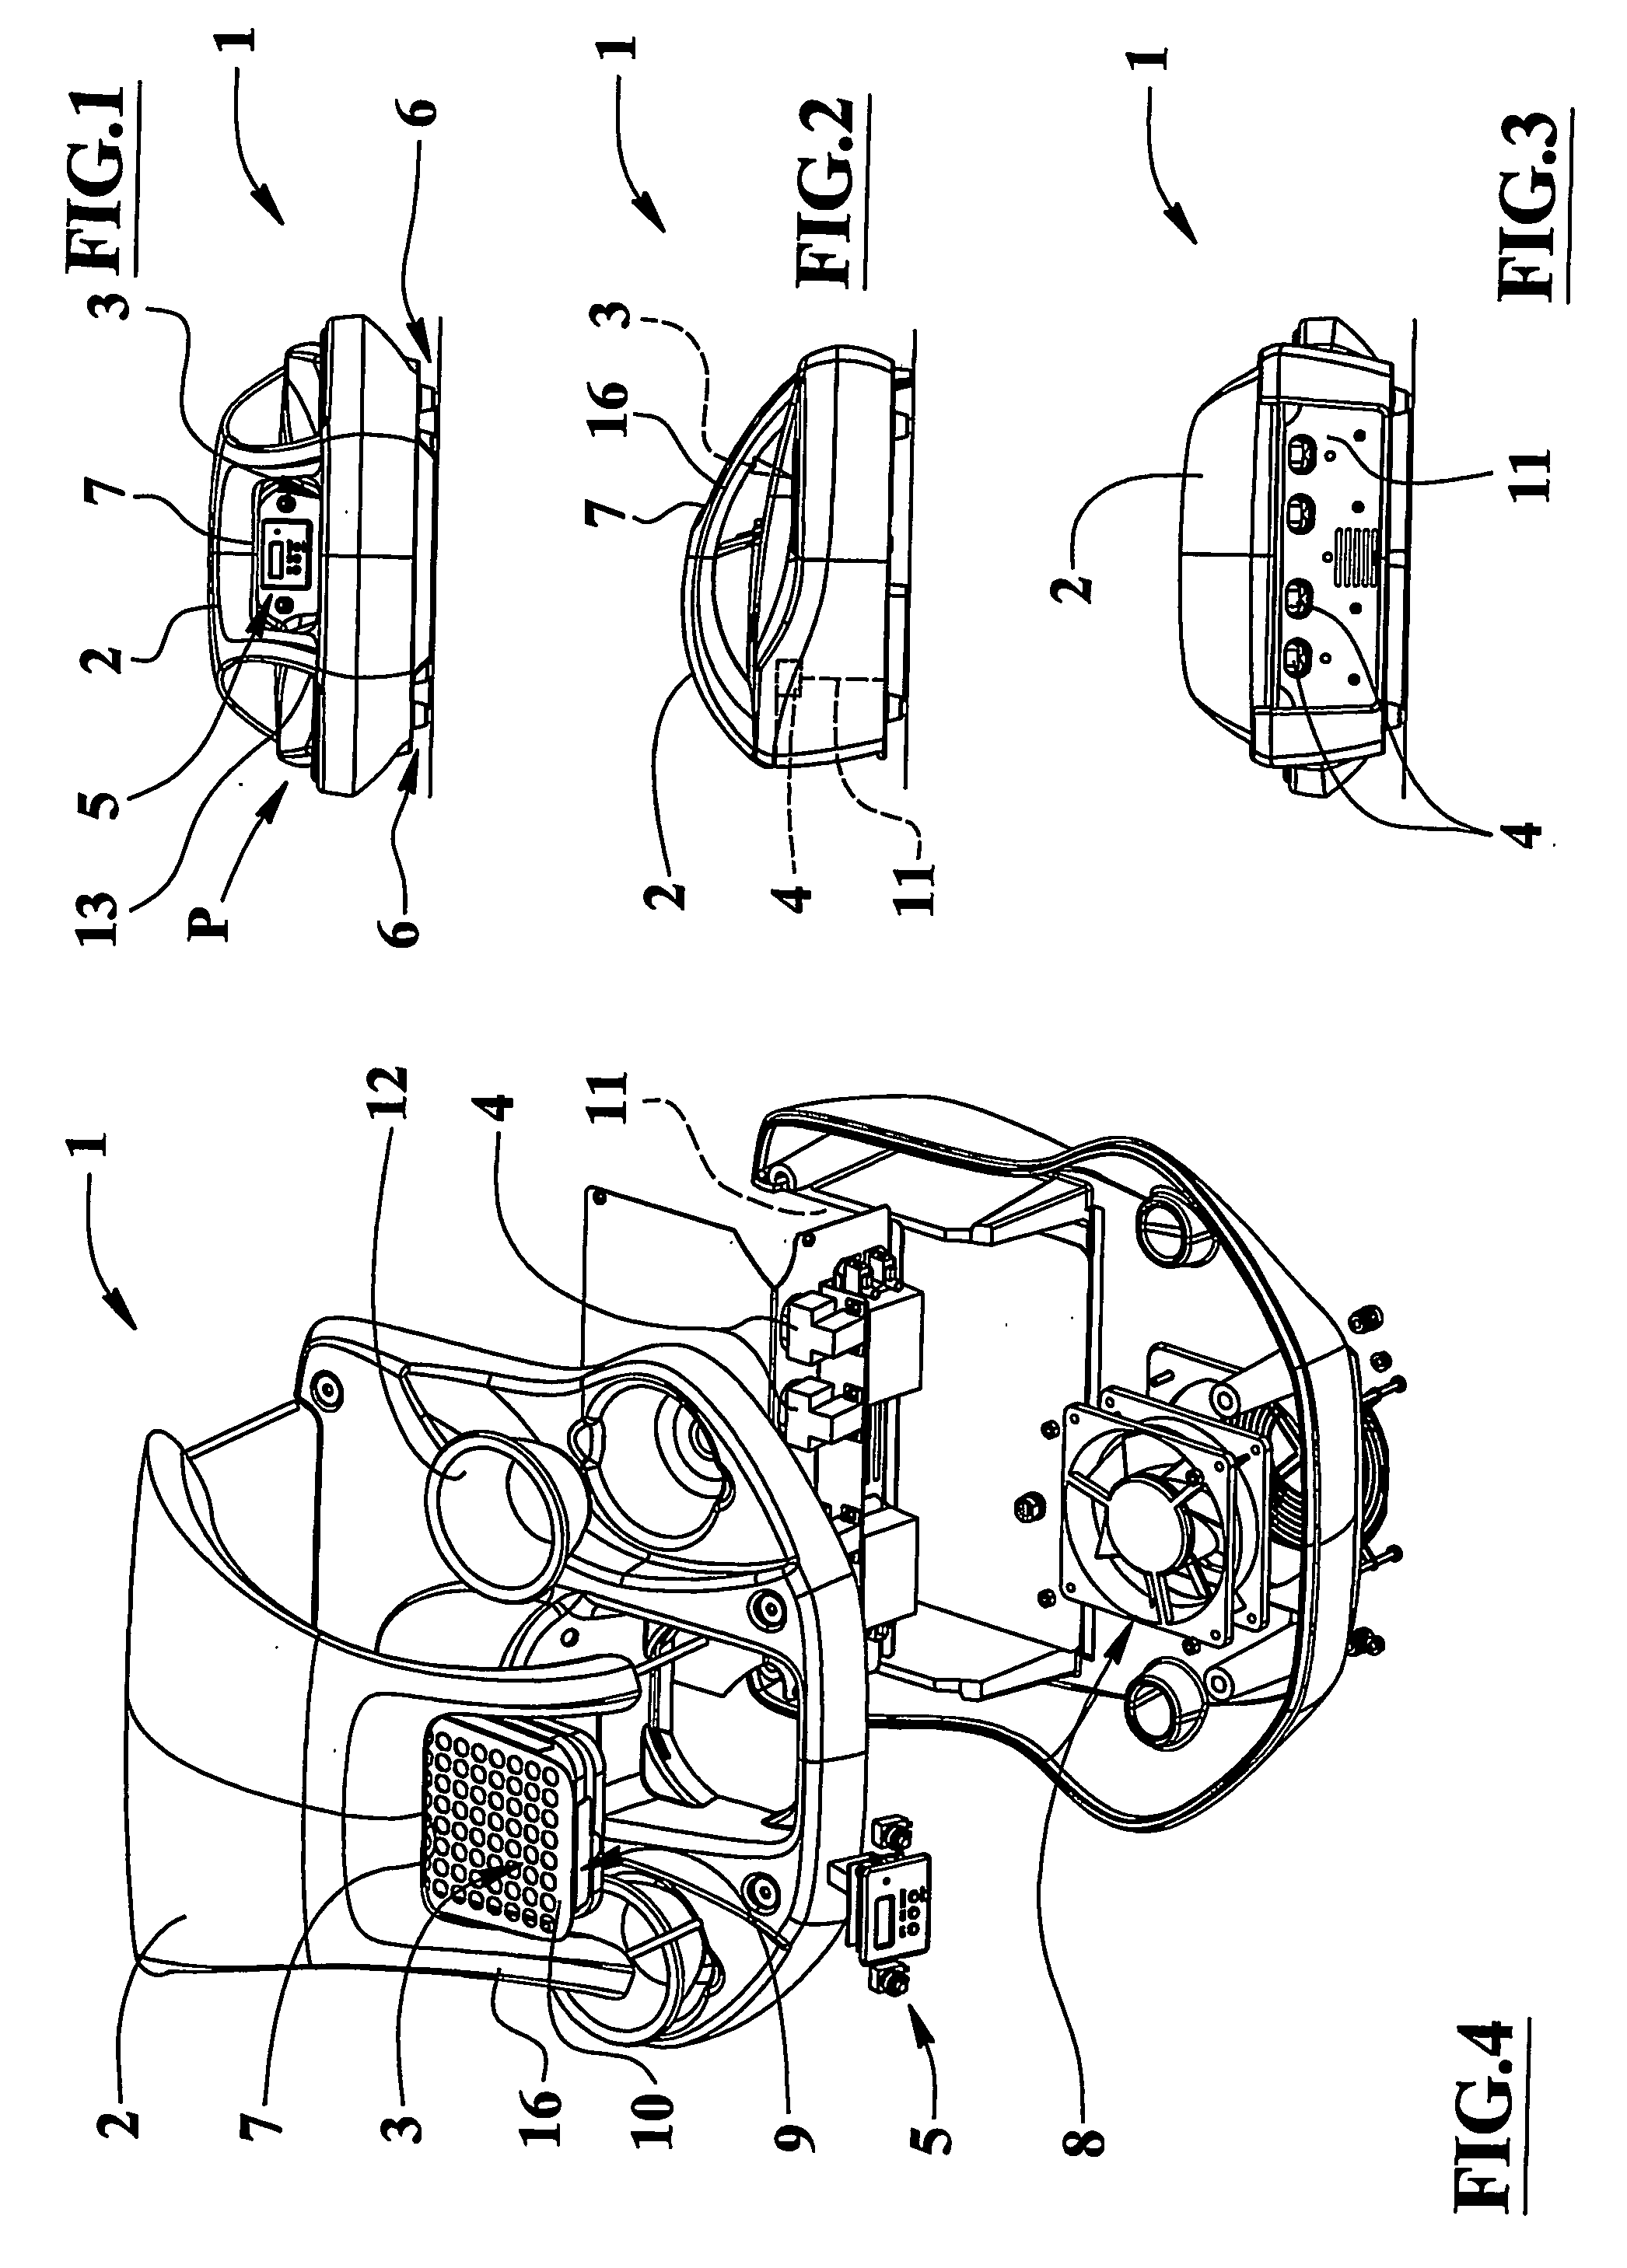 Device for beauty treatment of limbs